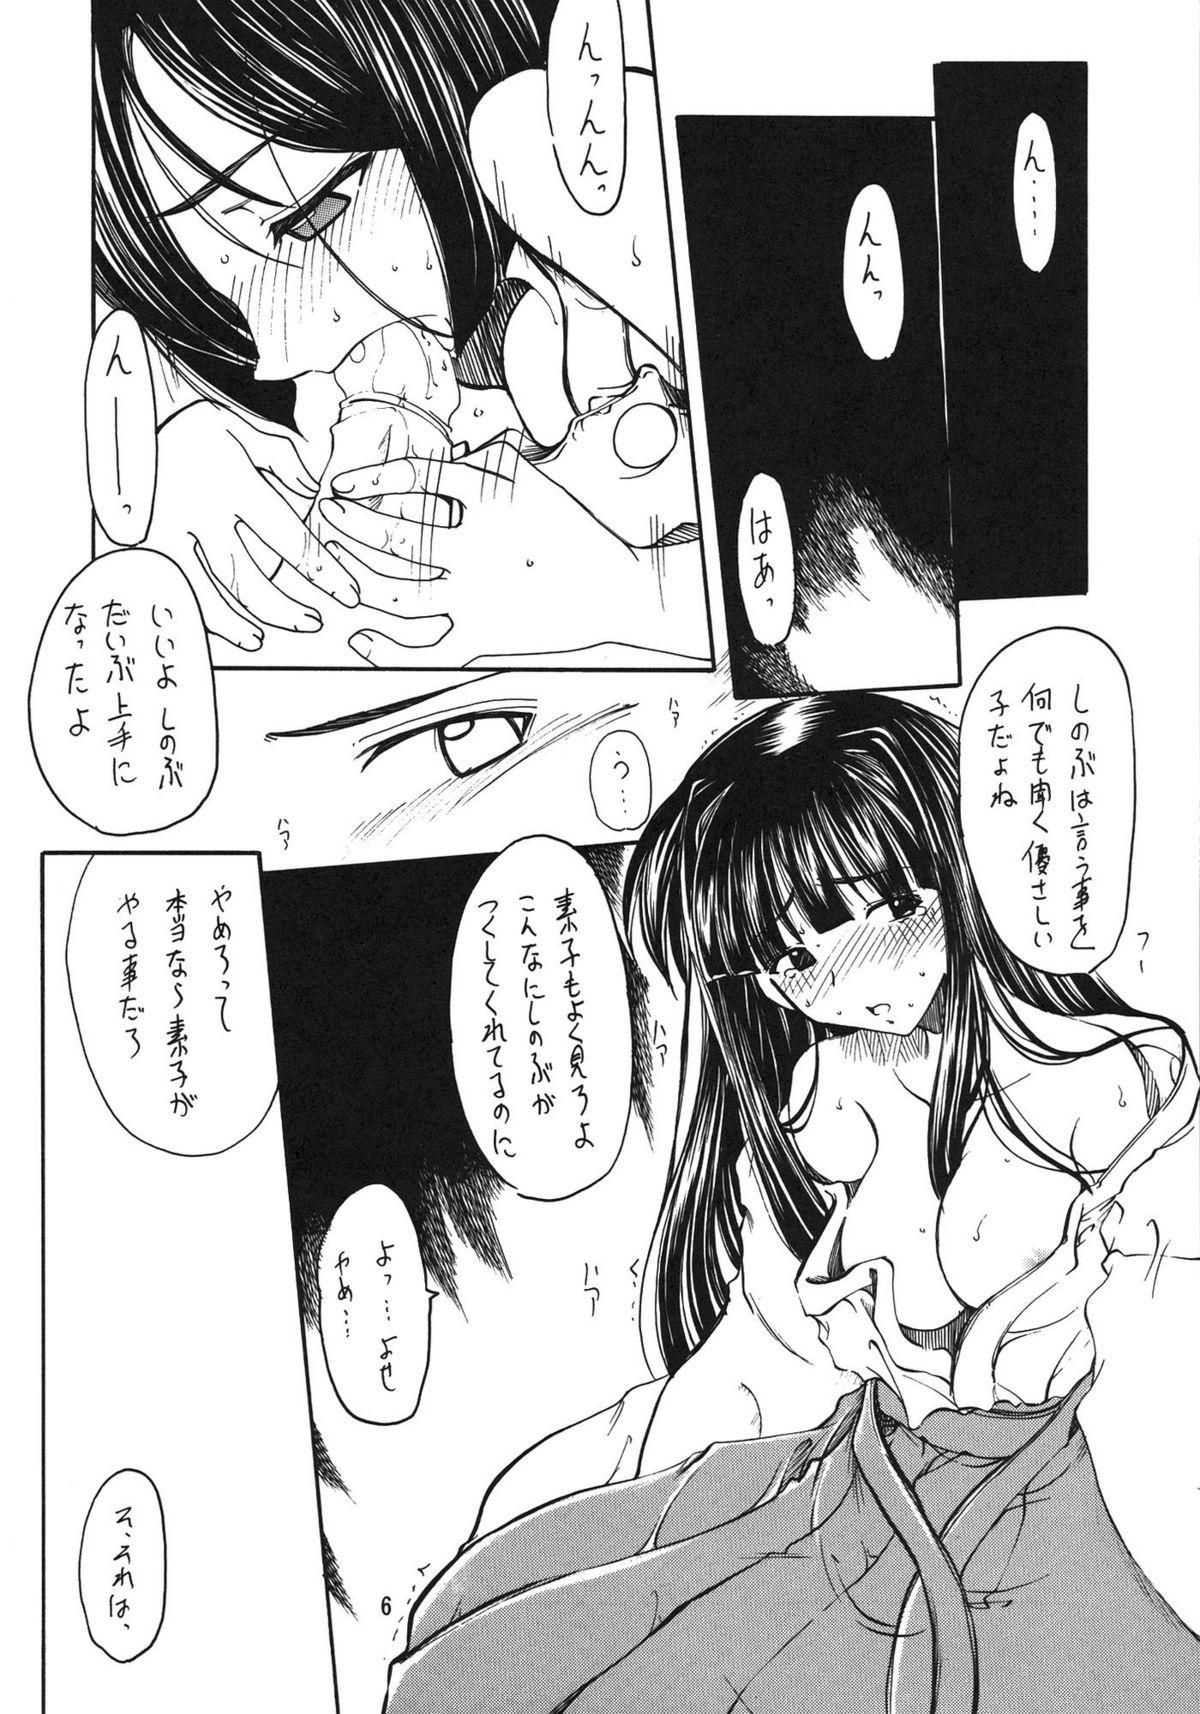 Tanned Love Bura - Love hina T Girl - Page 6